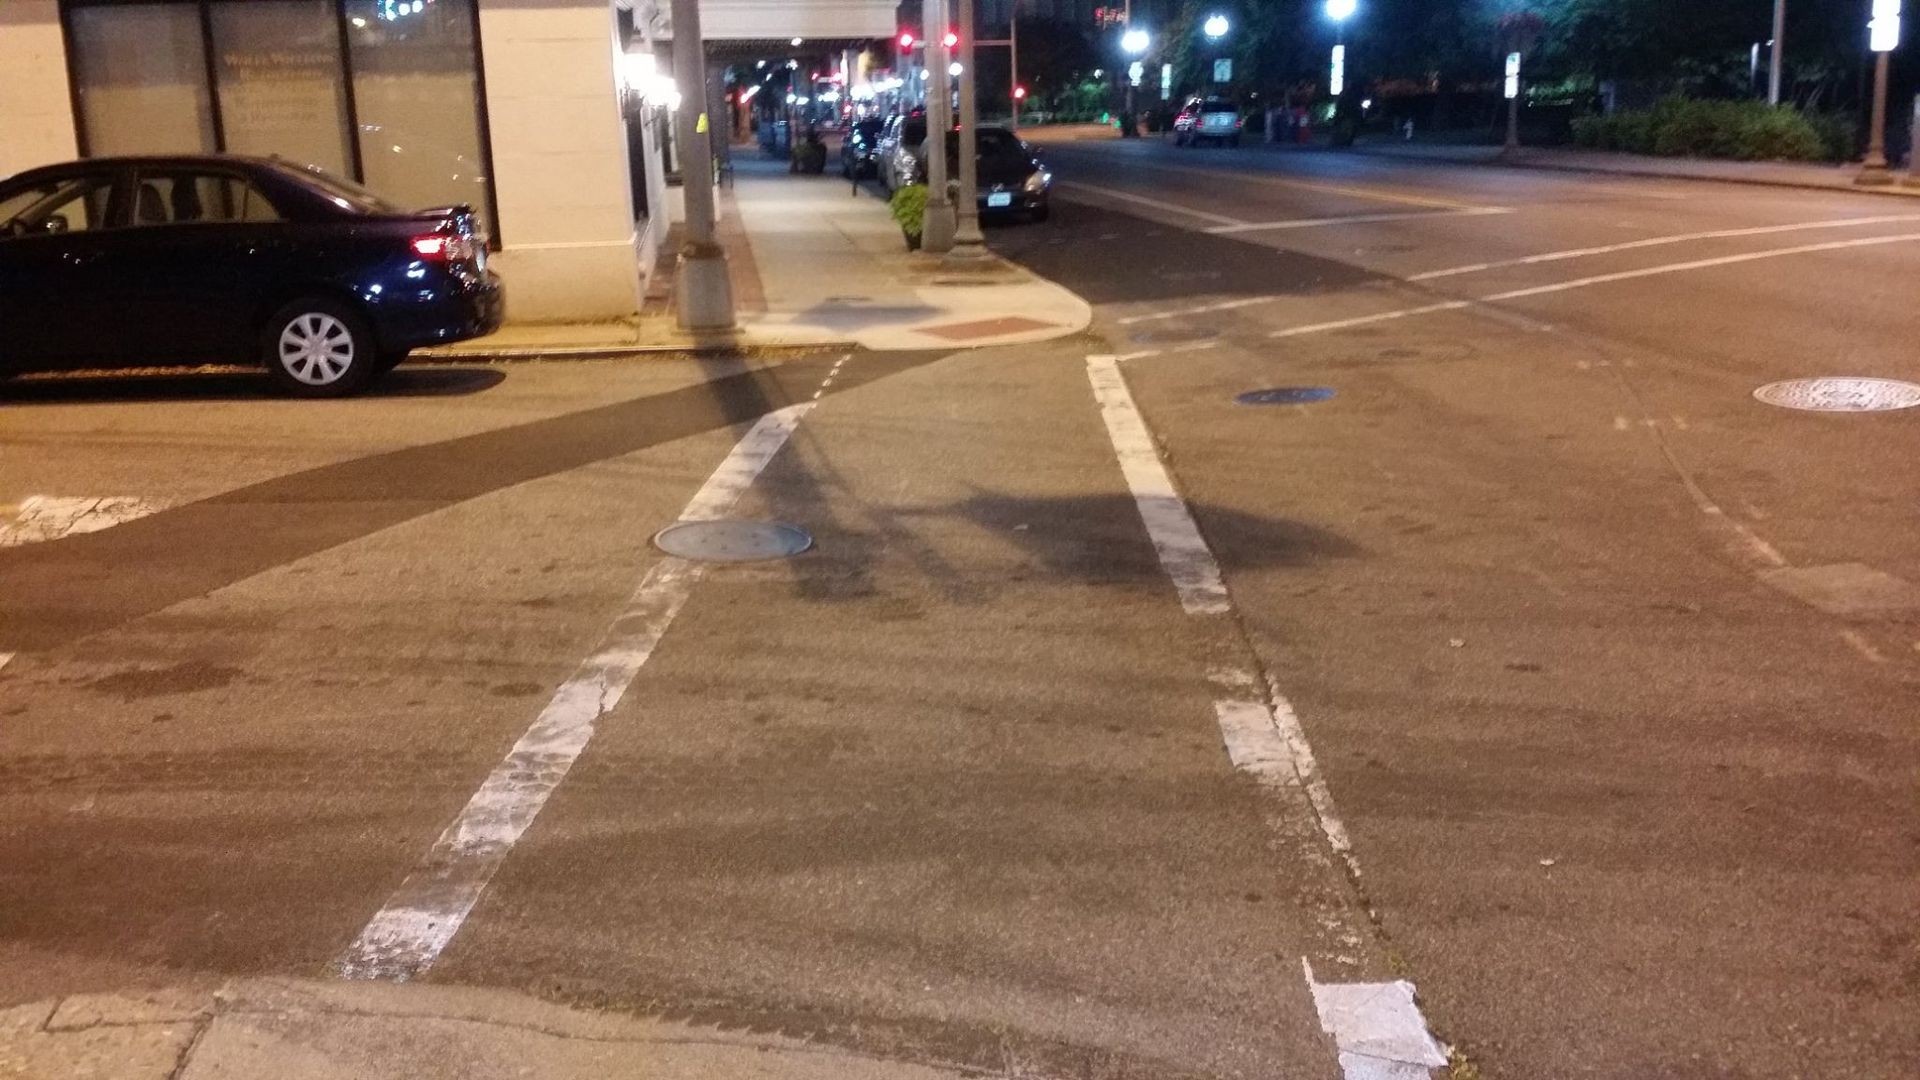 Roanoake Thermoplastic Crosswalks and Stop Bars Before and After